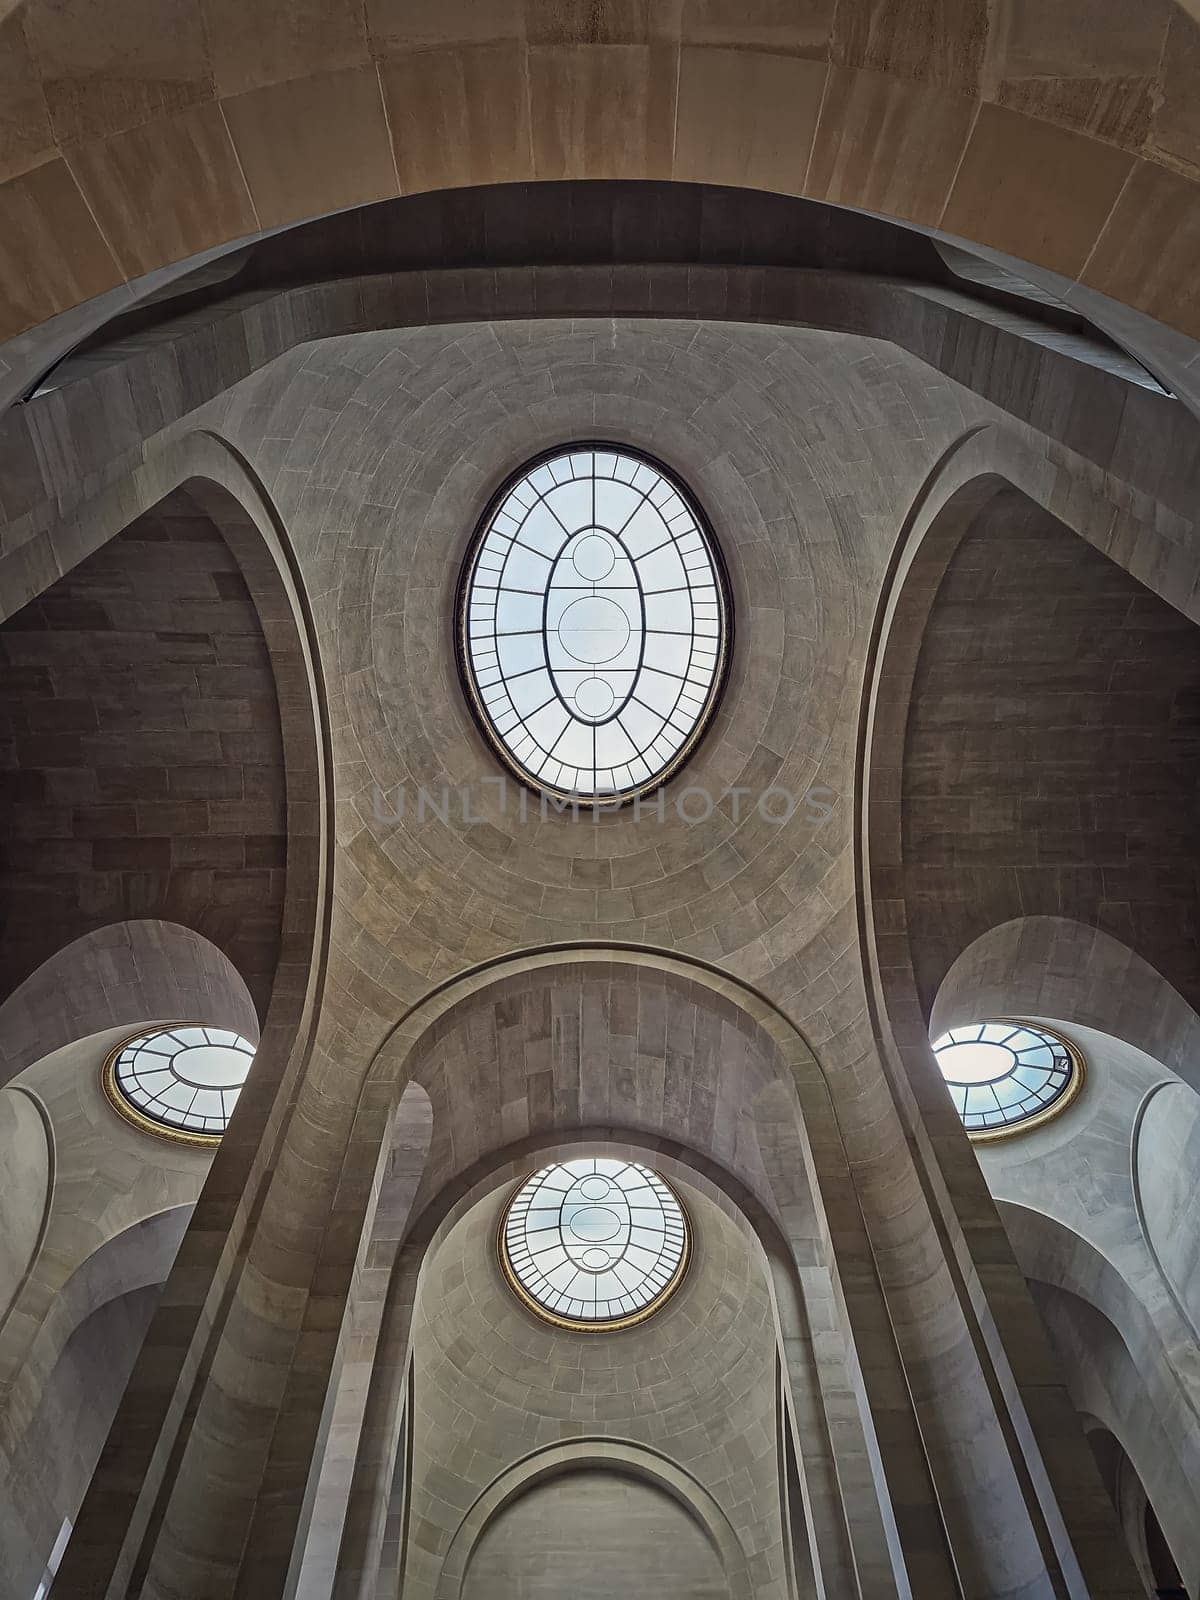 Ceiling architectural details with tall arches and round windows inside Louvre museum hall, Paris, France by psychoshadow